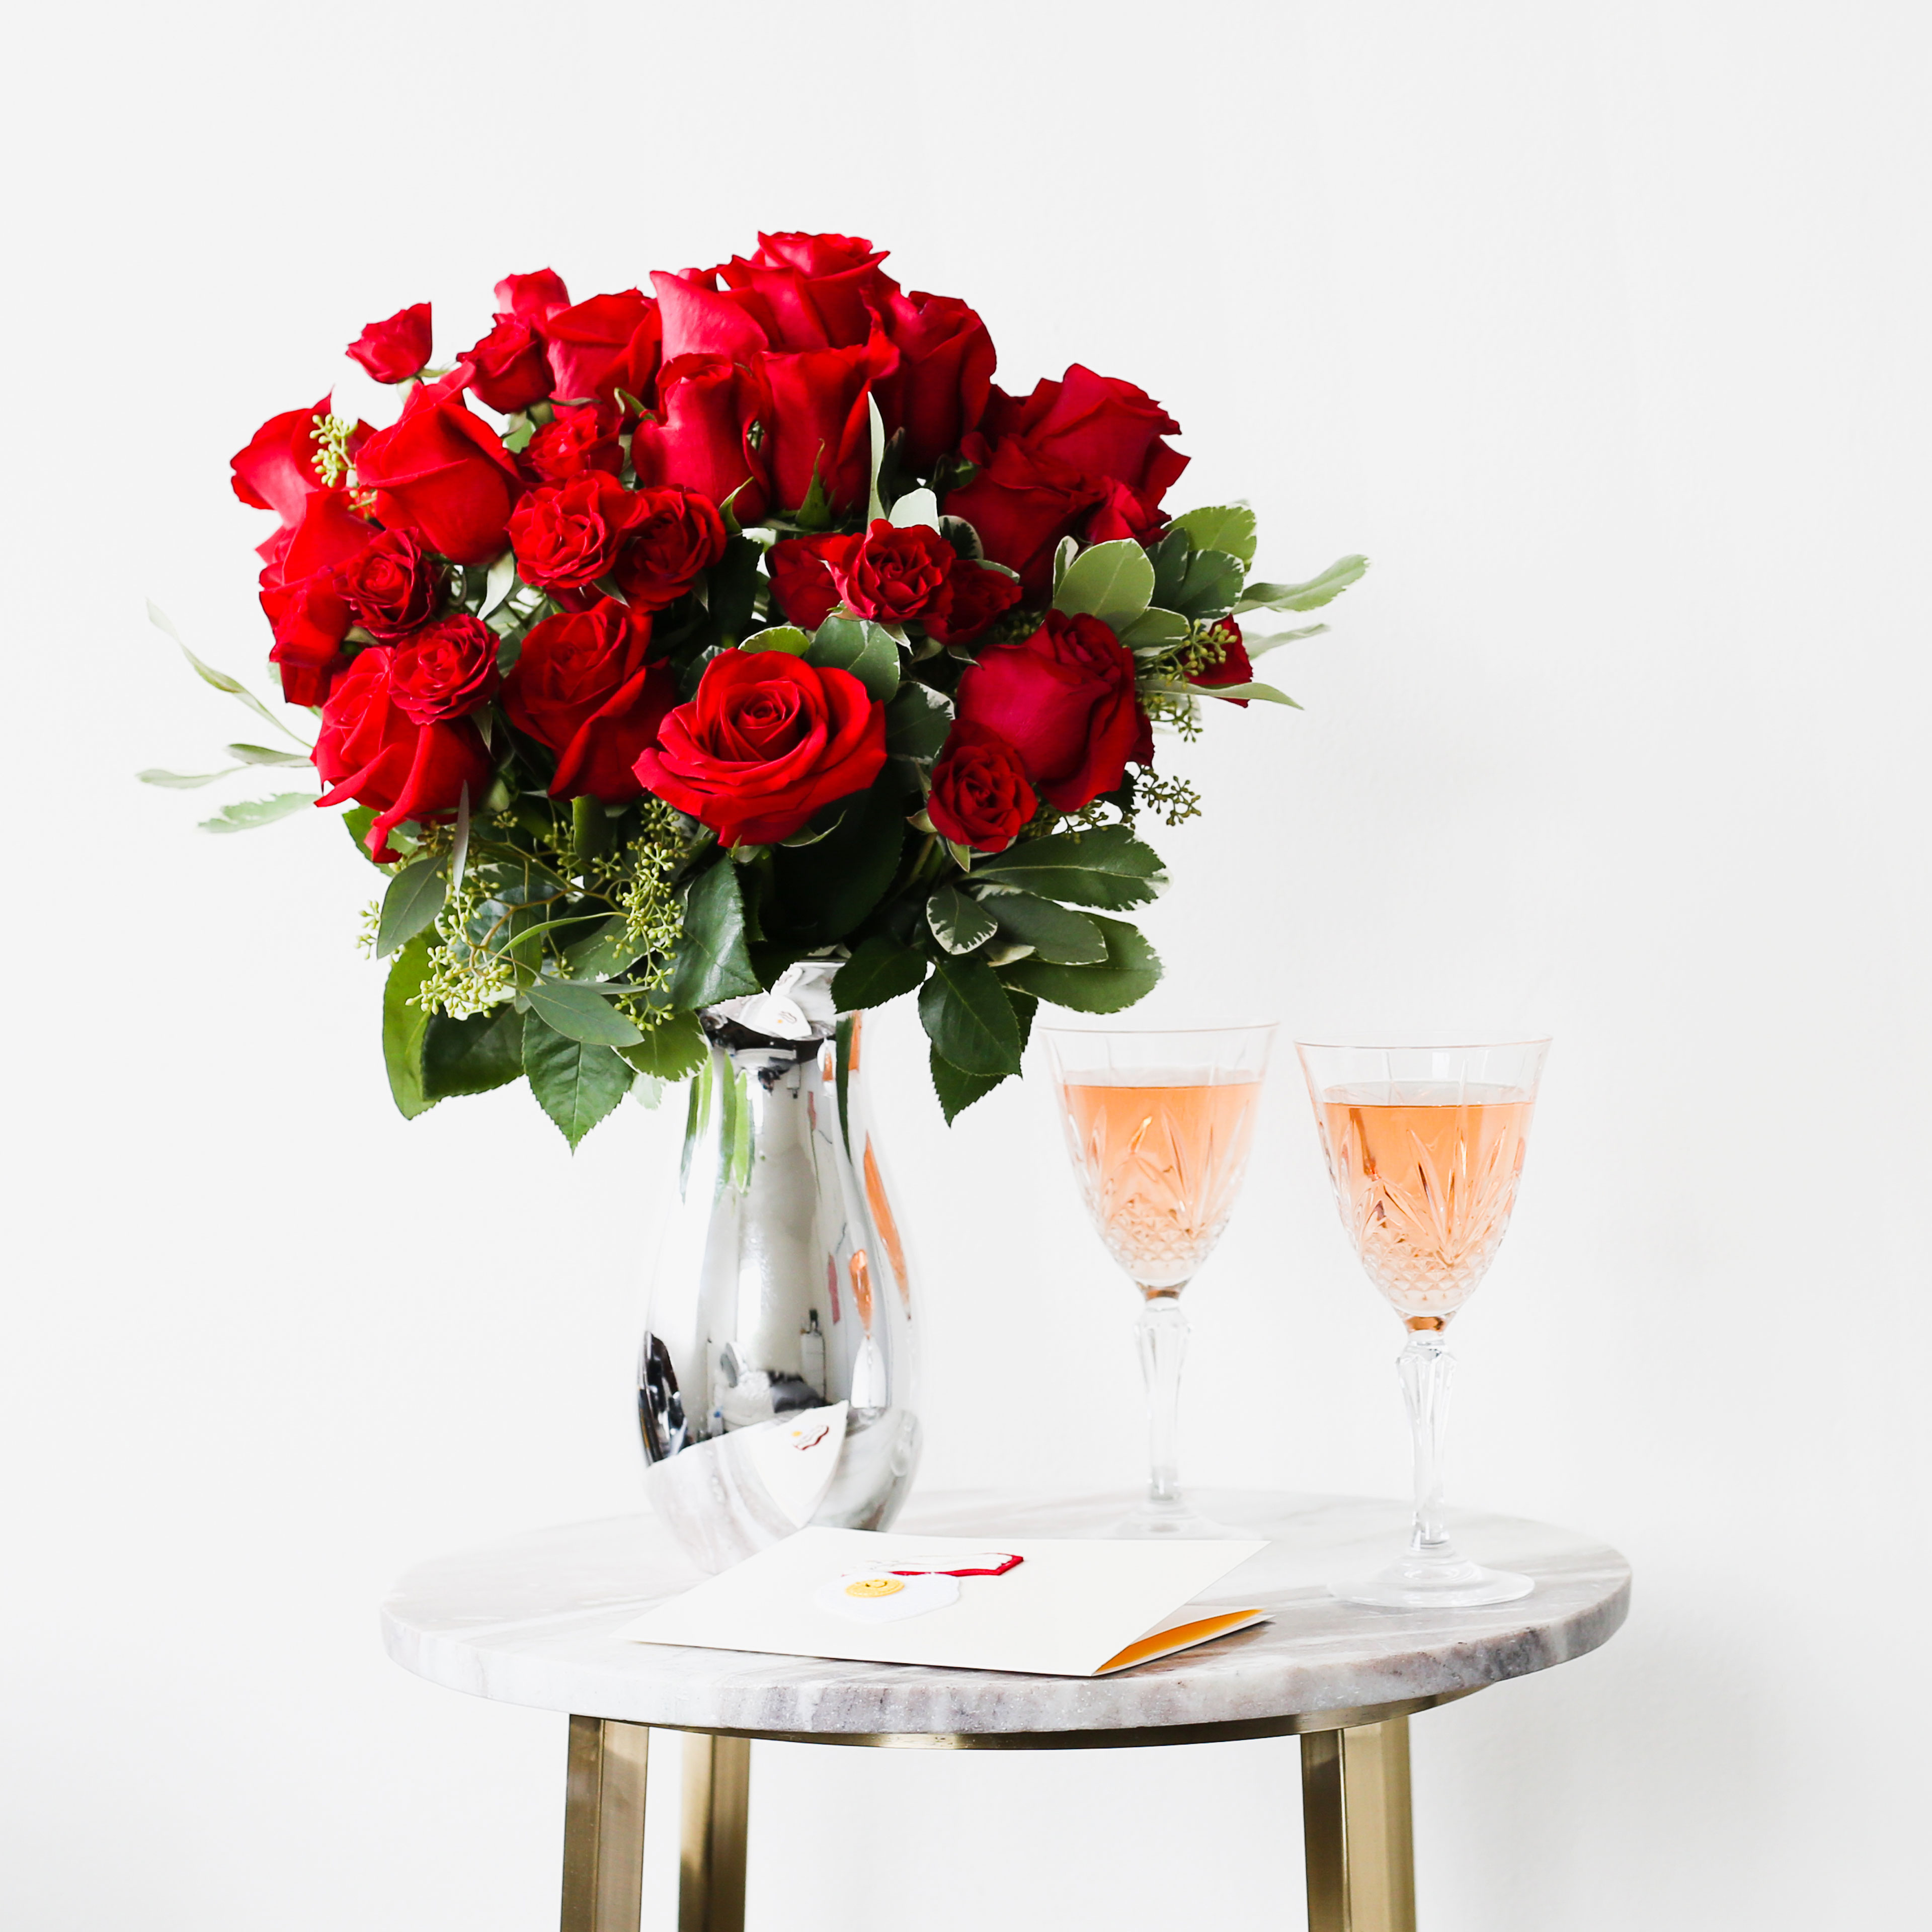 red roses in a vase on table with champagne